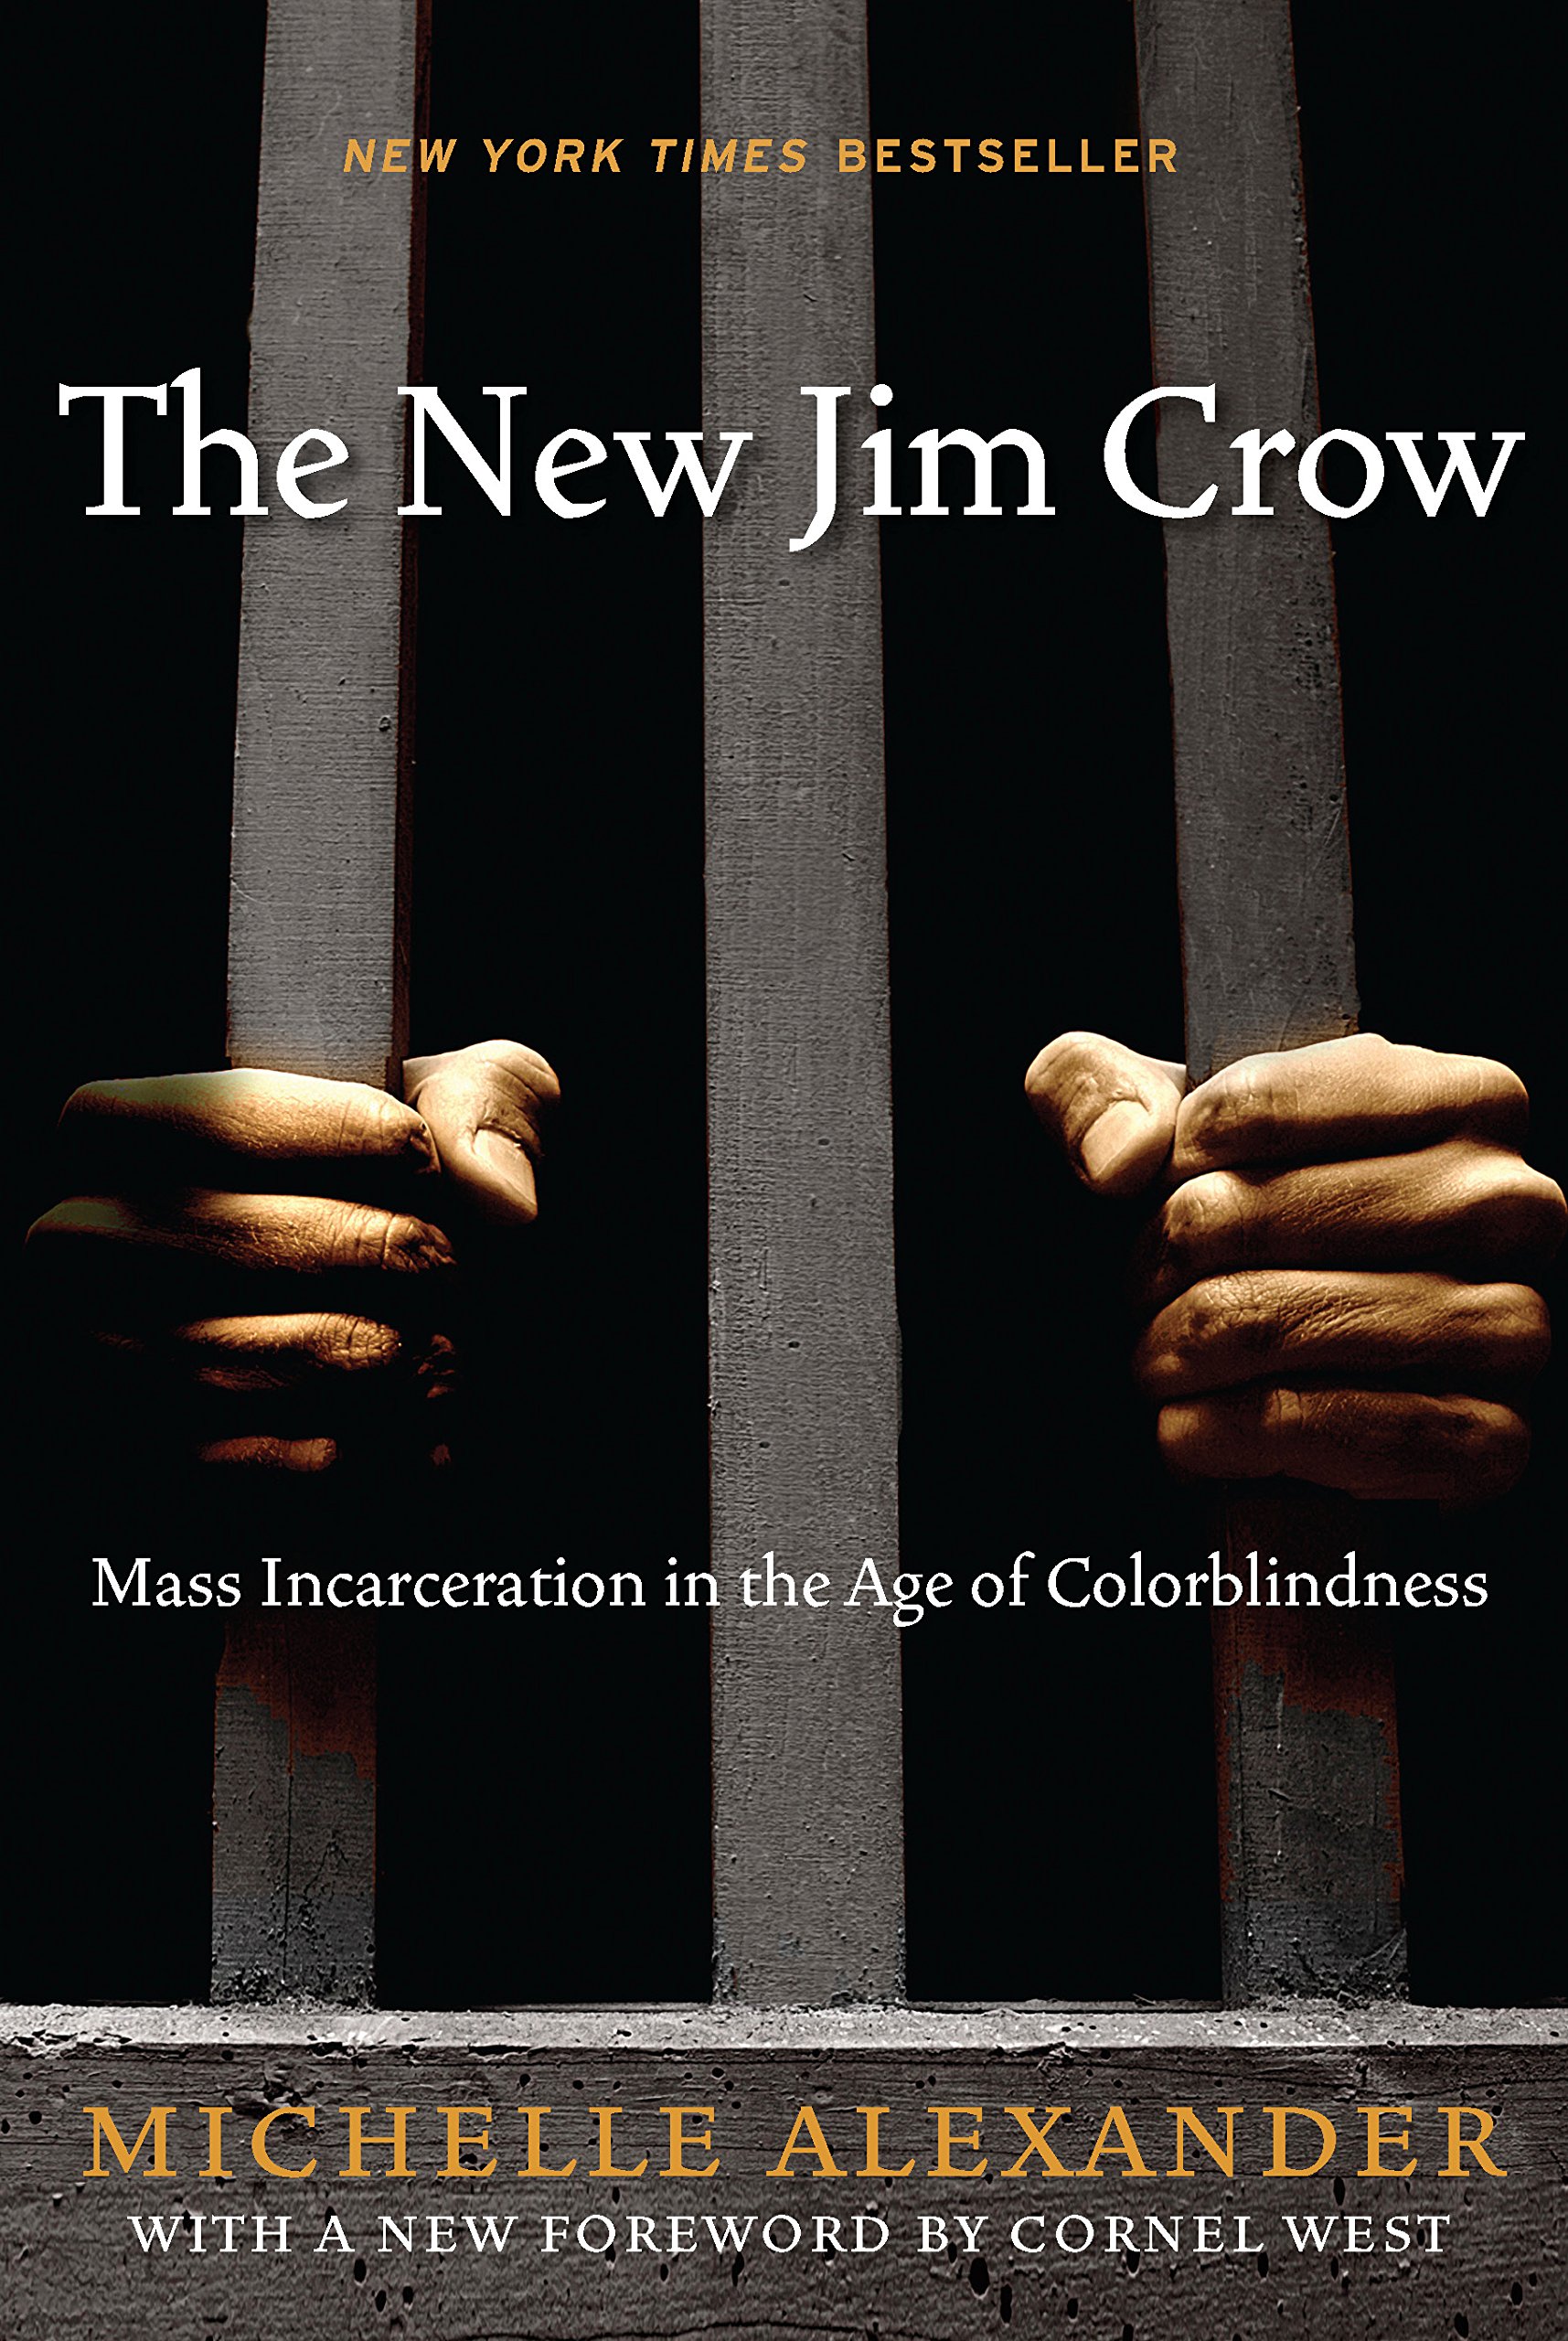 Michelle Alexander, The New Jim Crow